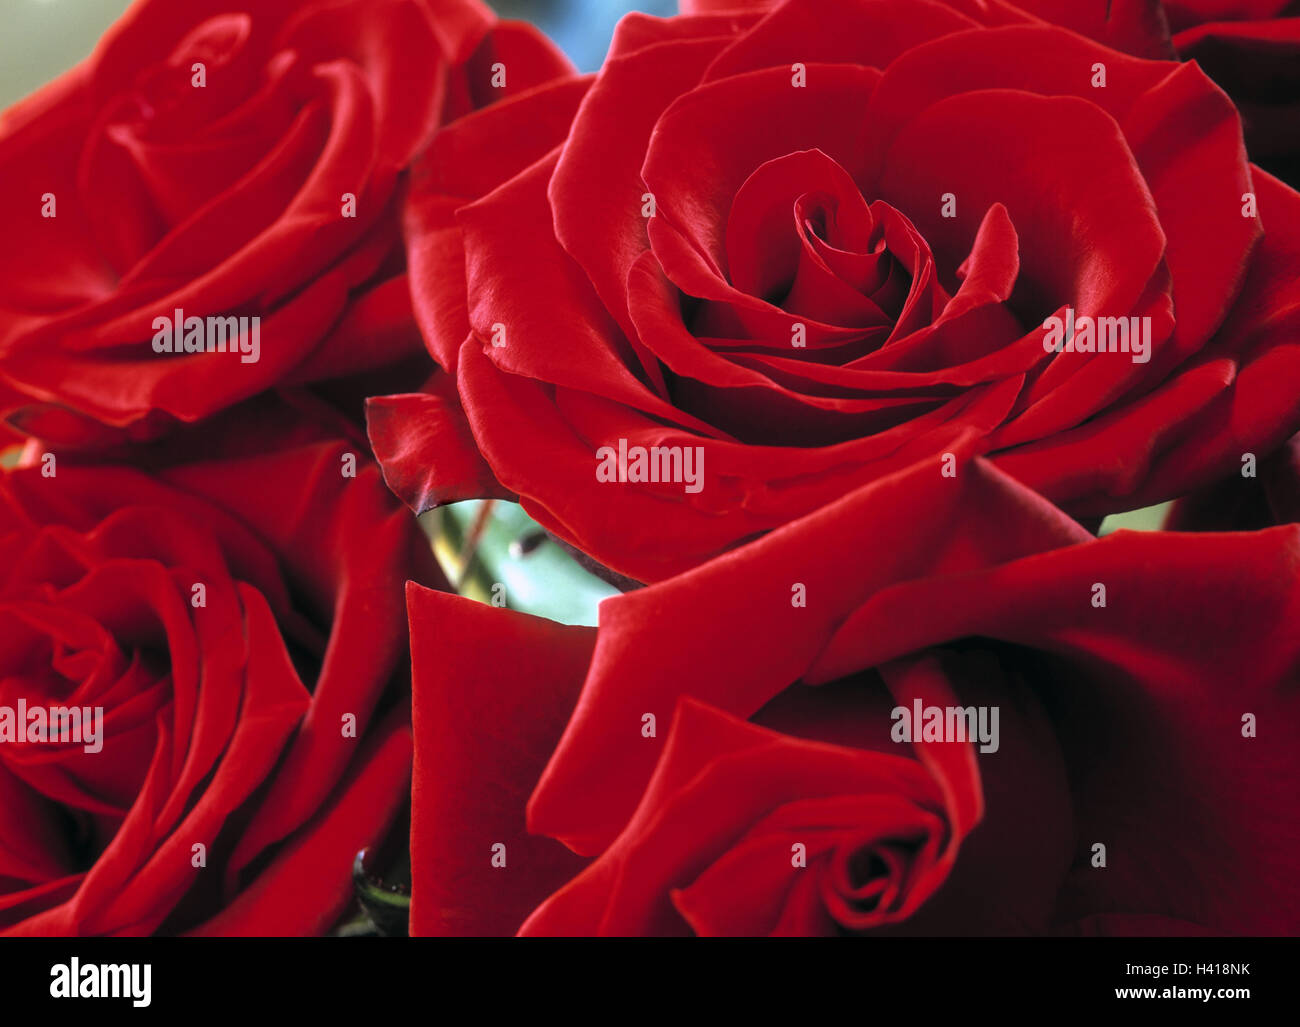 Roses, red, detail, not freely for calendar mk/Rb blossoms, nature, flowers, plants, summer flowers, flower heads, petals, rose blossoms, rose leaves, blossom, rose plant, cut flowers, icon, love, dear icon, beauty, odour, rose odour, softly, delicacy, ro Stock Photo